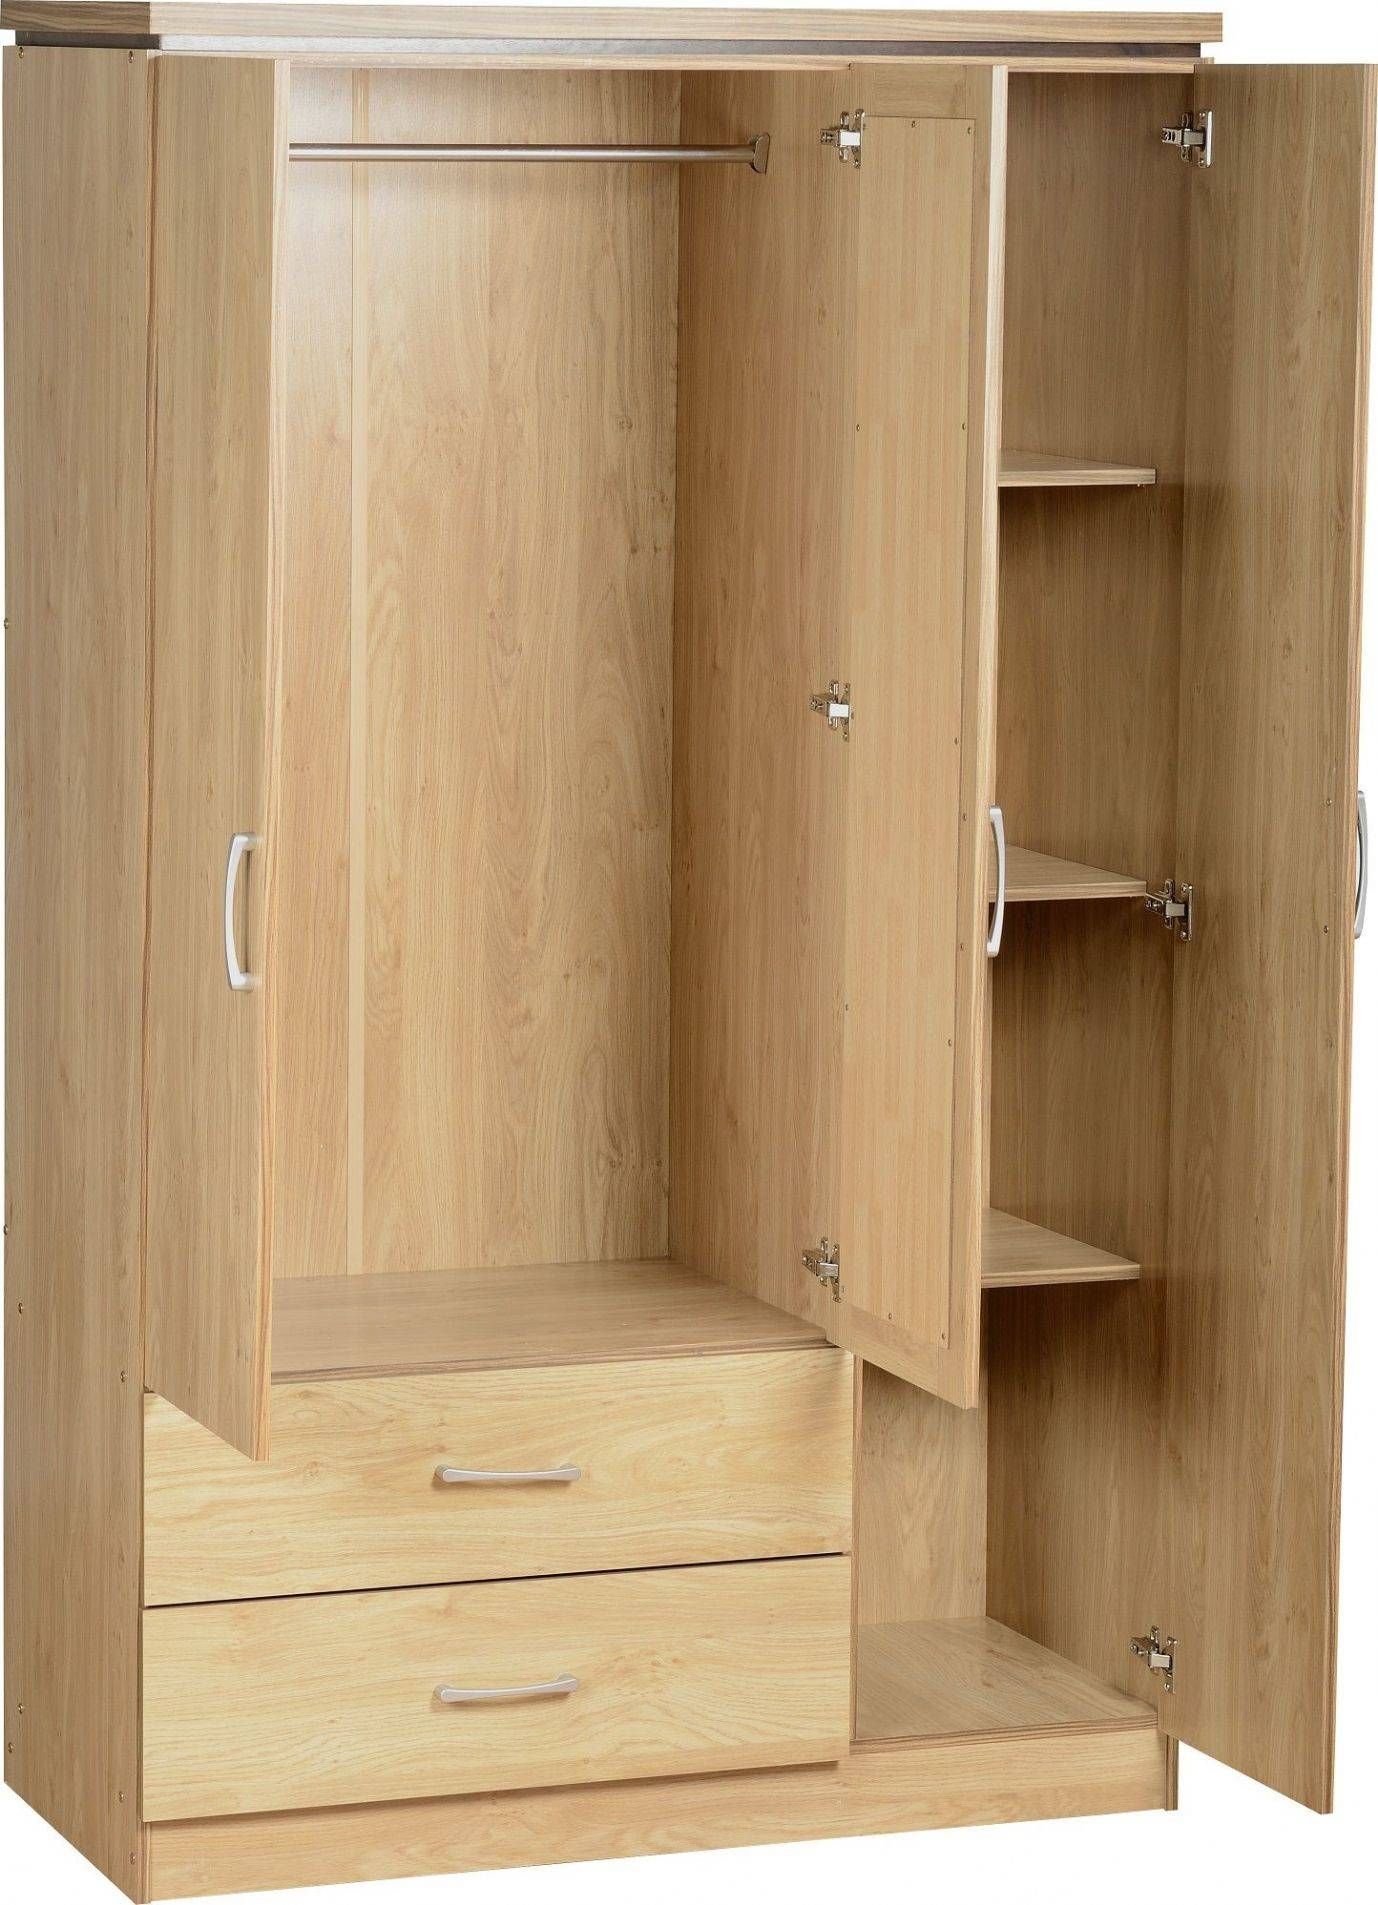 Wardrobes With Shelves, Ca Baumhaus Amelie Oak Childrens Kids Within Wardrobes With Drawers And Shelves (View 4 of 30)